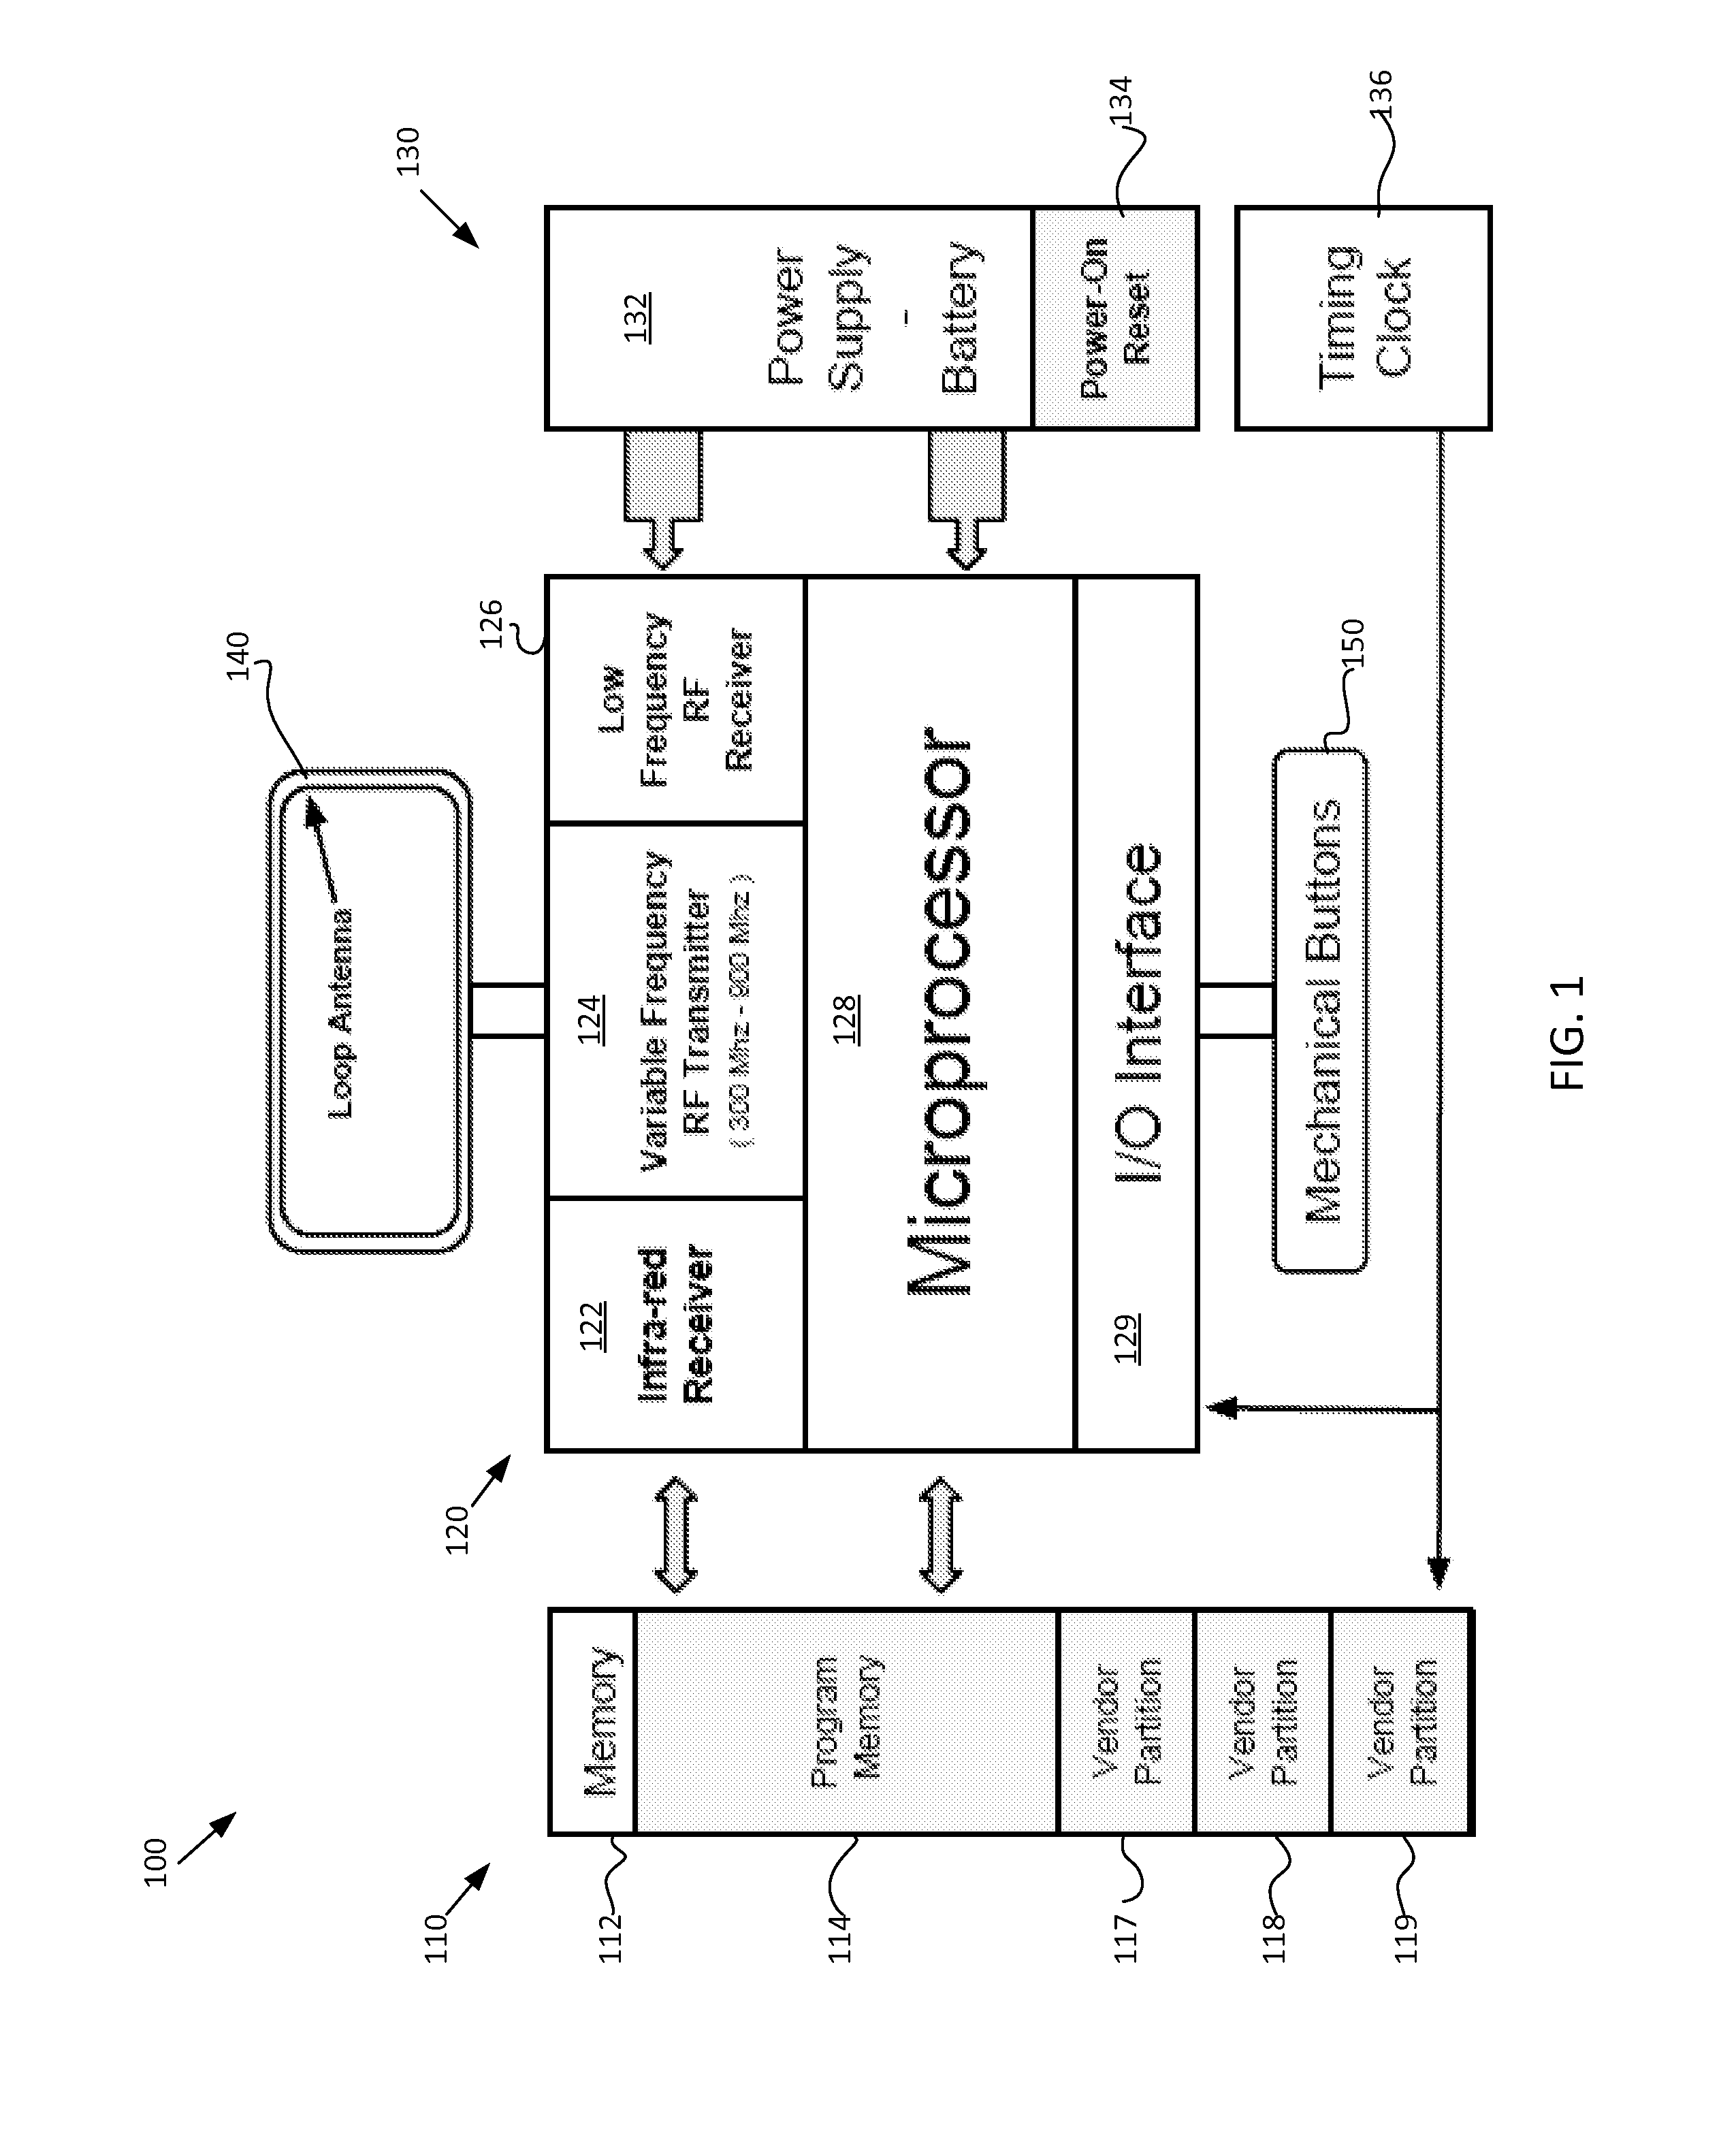 Method and apparatus for implementing multi-vendor rolling code keyless entry systems